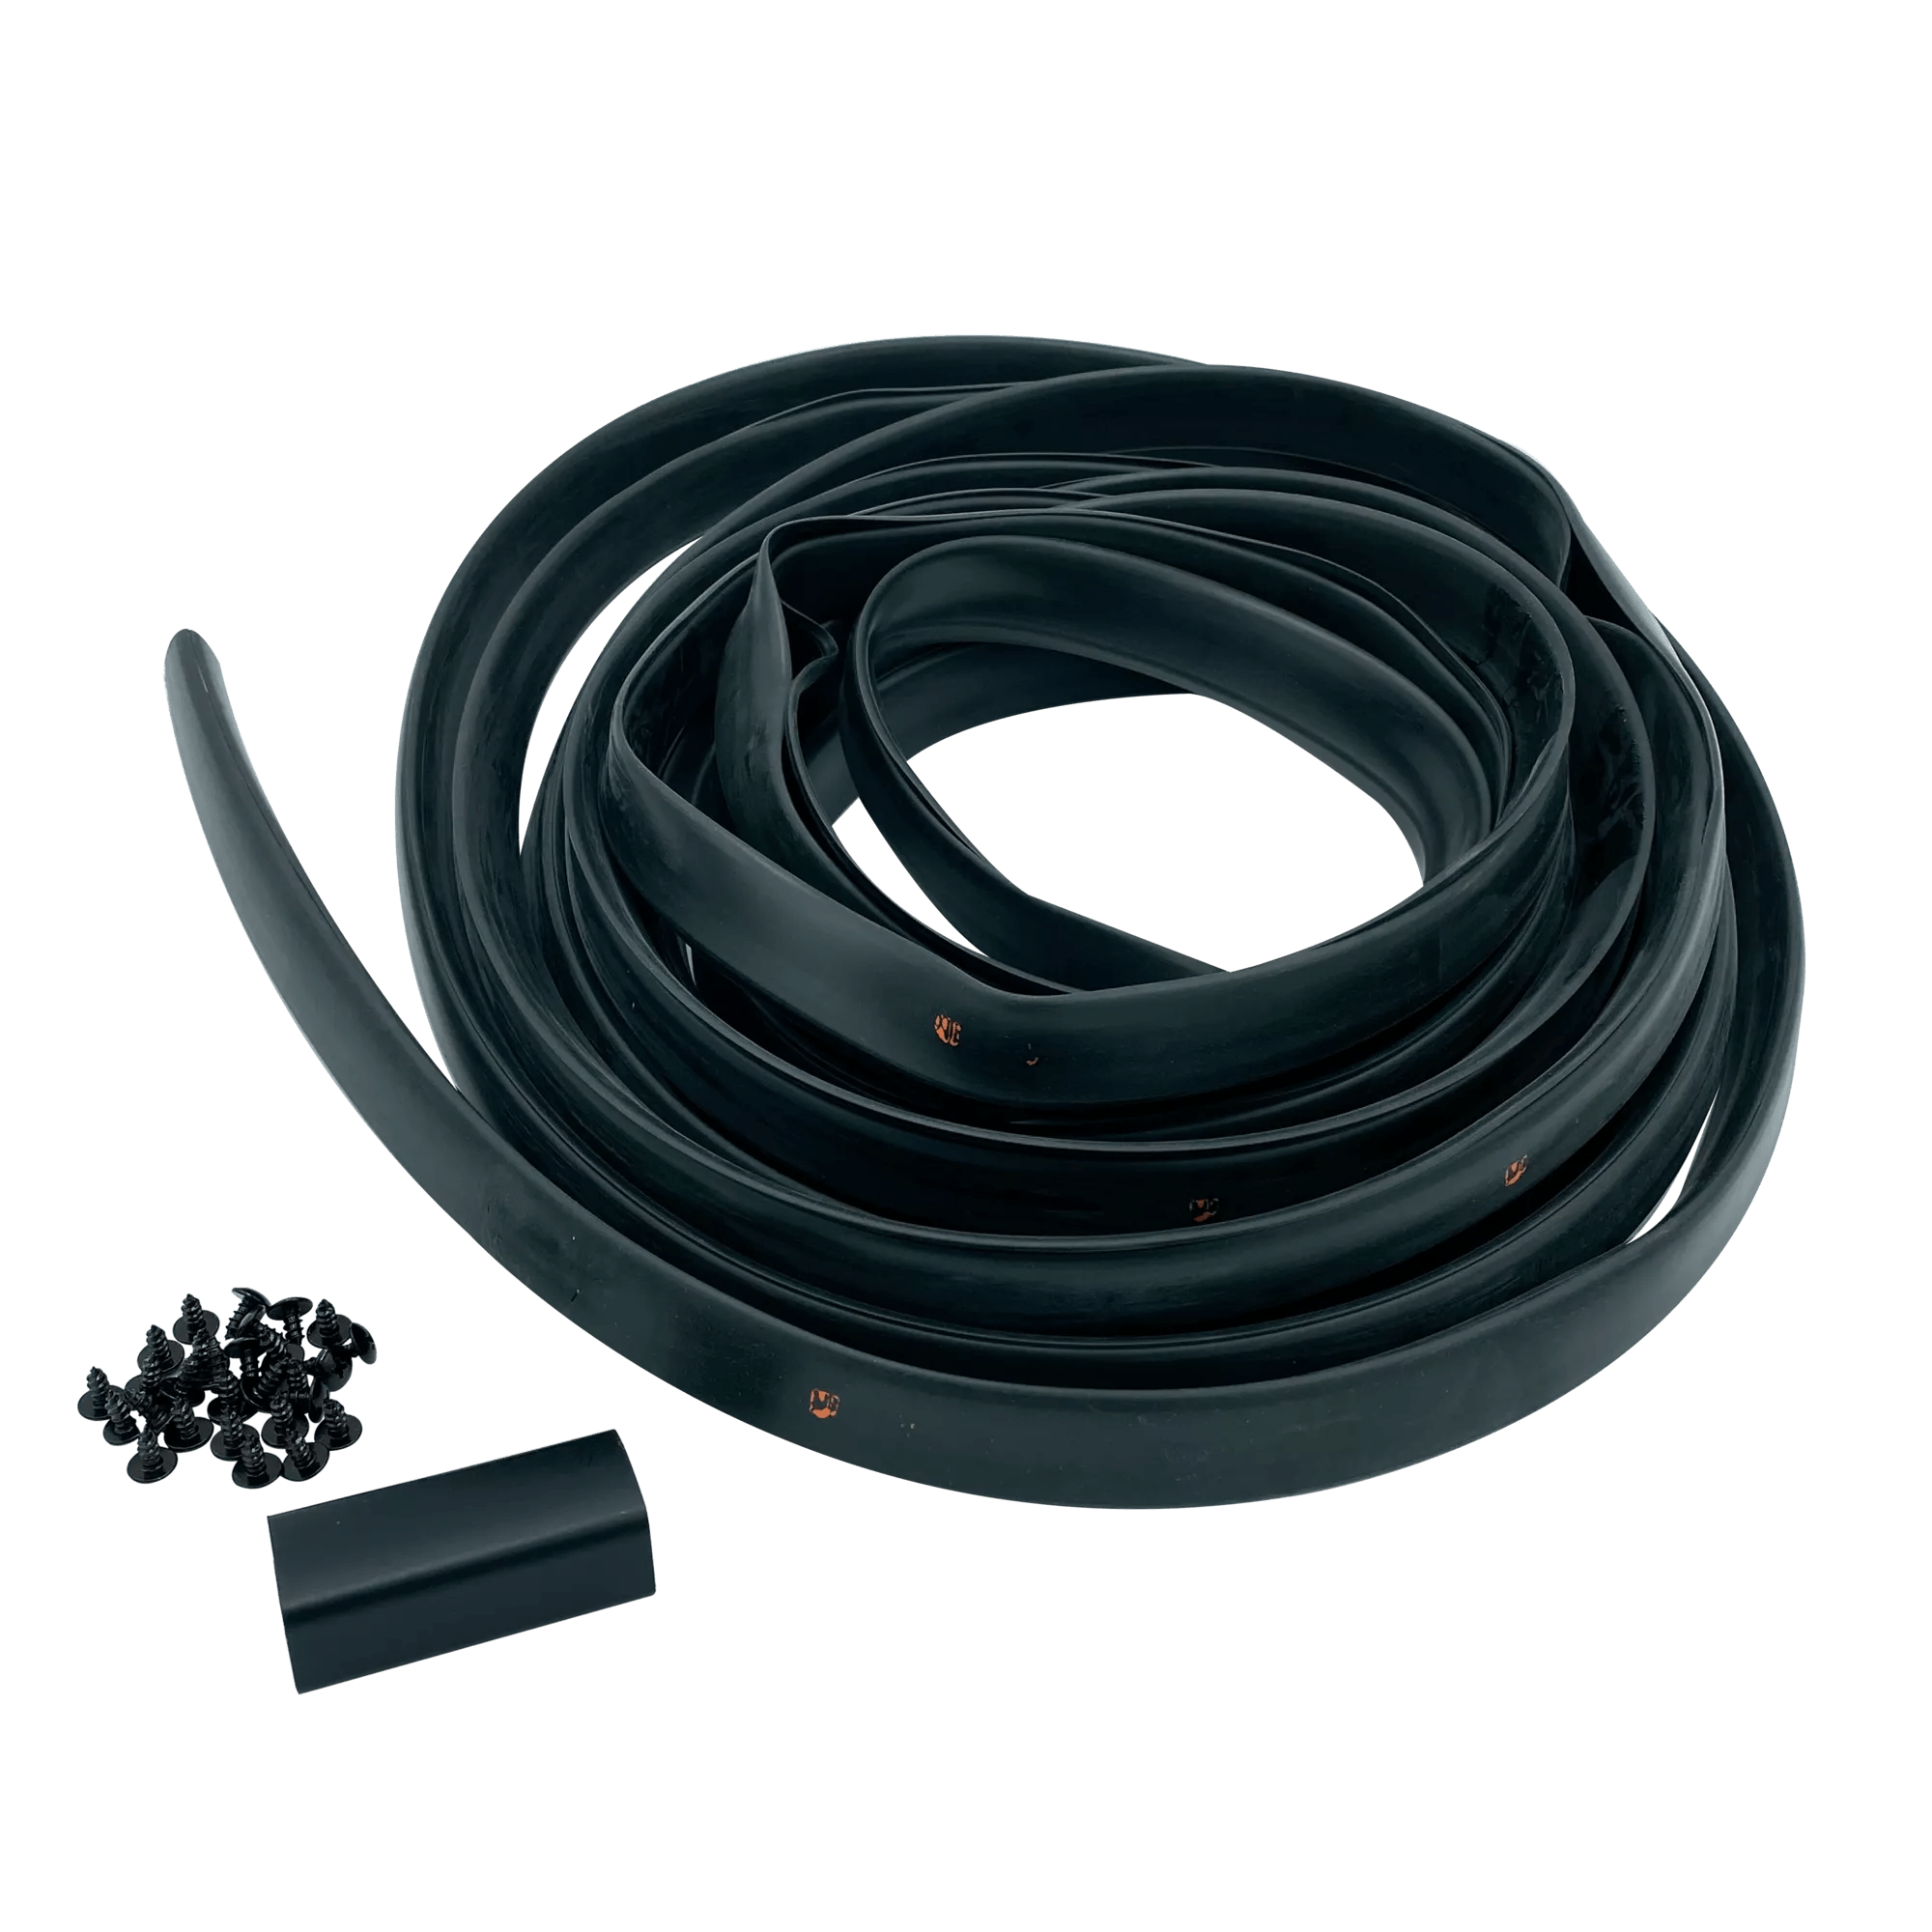 PELICAN - Contour Molding Kit in Black -  - PS0263-28 - ISO